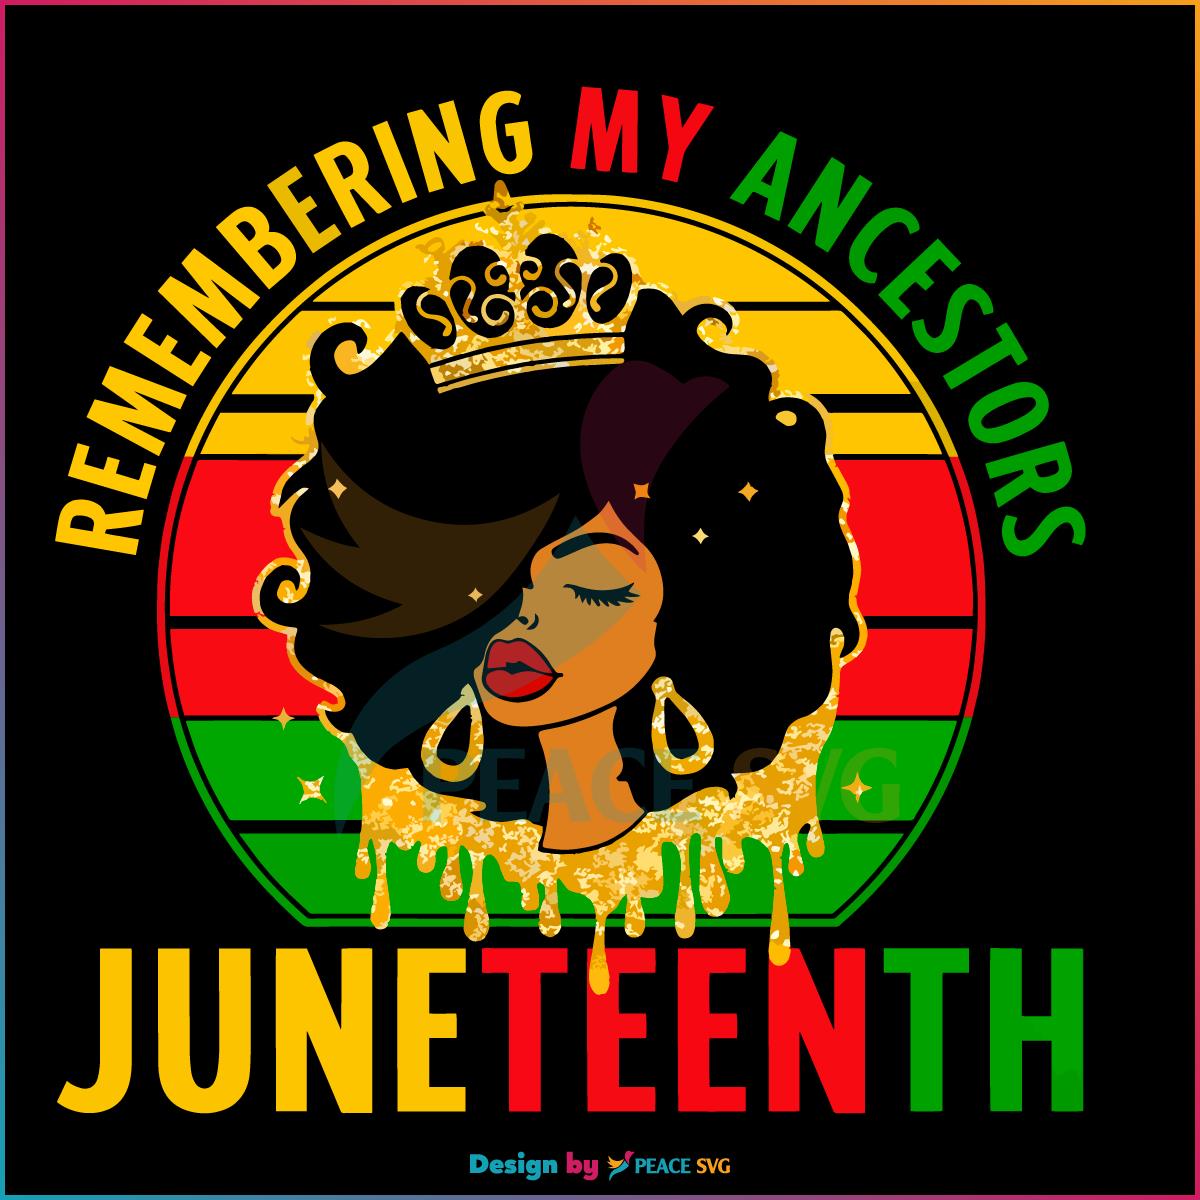 Free Remembering My Ancestors Juneteenth Png Silhouette Files